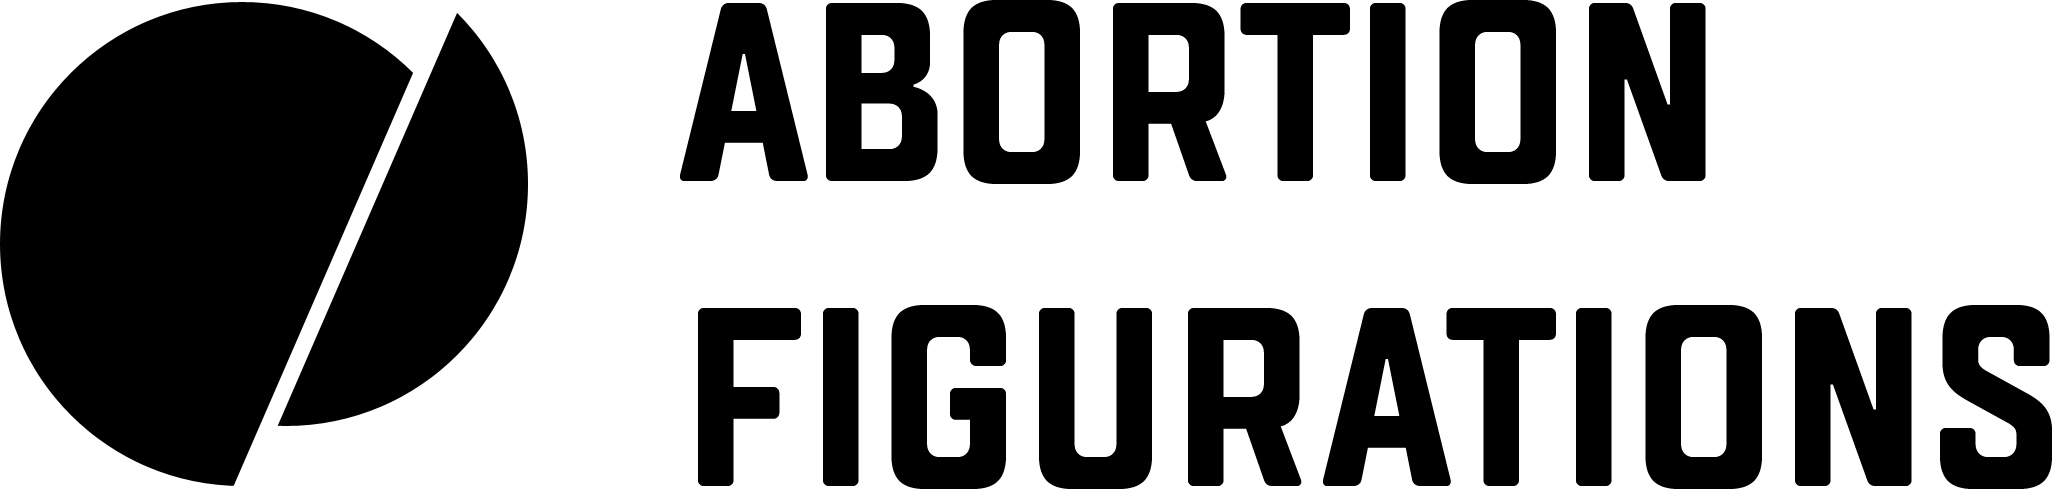 Abortion Figurations: Using Human Rights to Change Abortion Law: Engagement Patterns and Argumentation Figures in a Global Human Rights Figuration